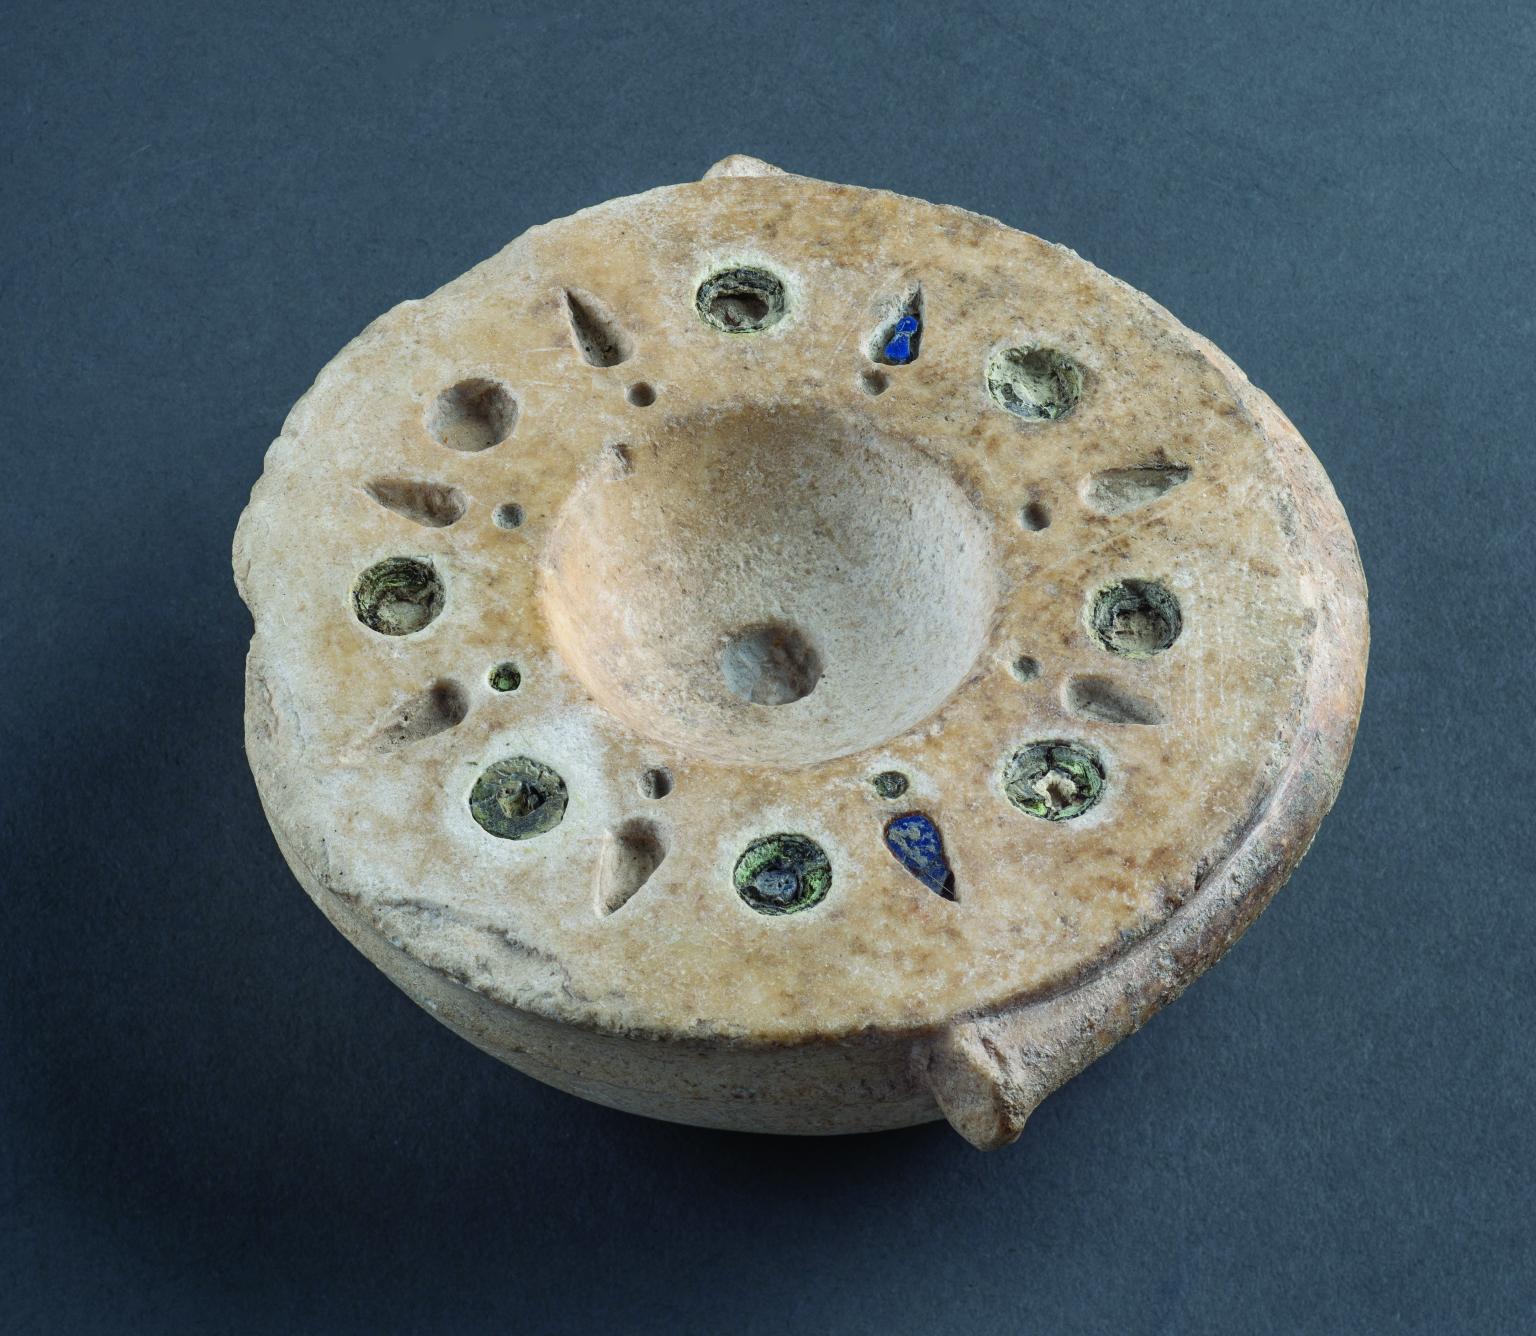 Limestone bowl with mosaic decoration around rim with alternating circular and bud-shaped inlaid blue and brown glass. 